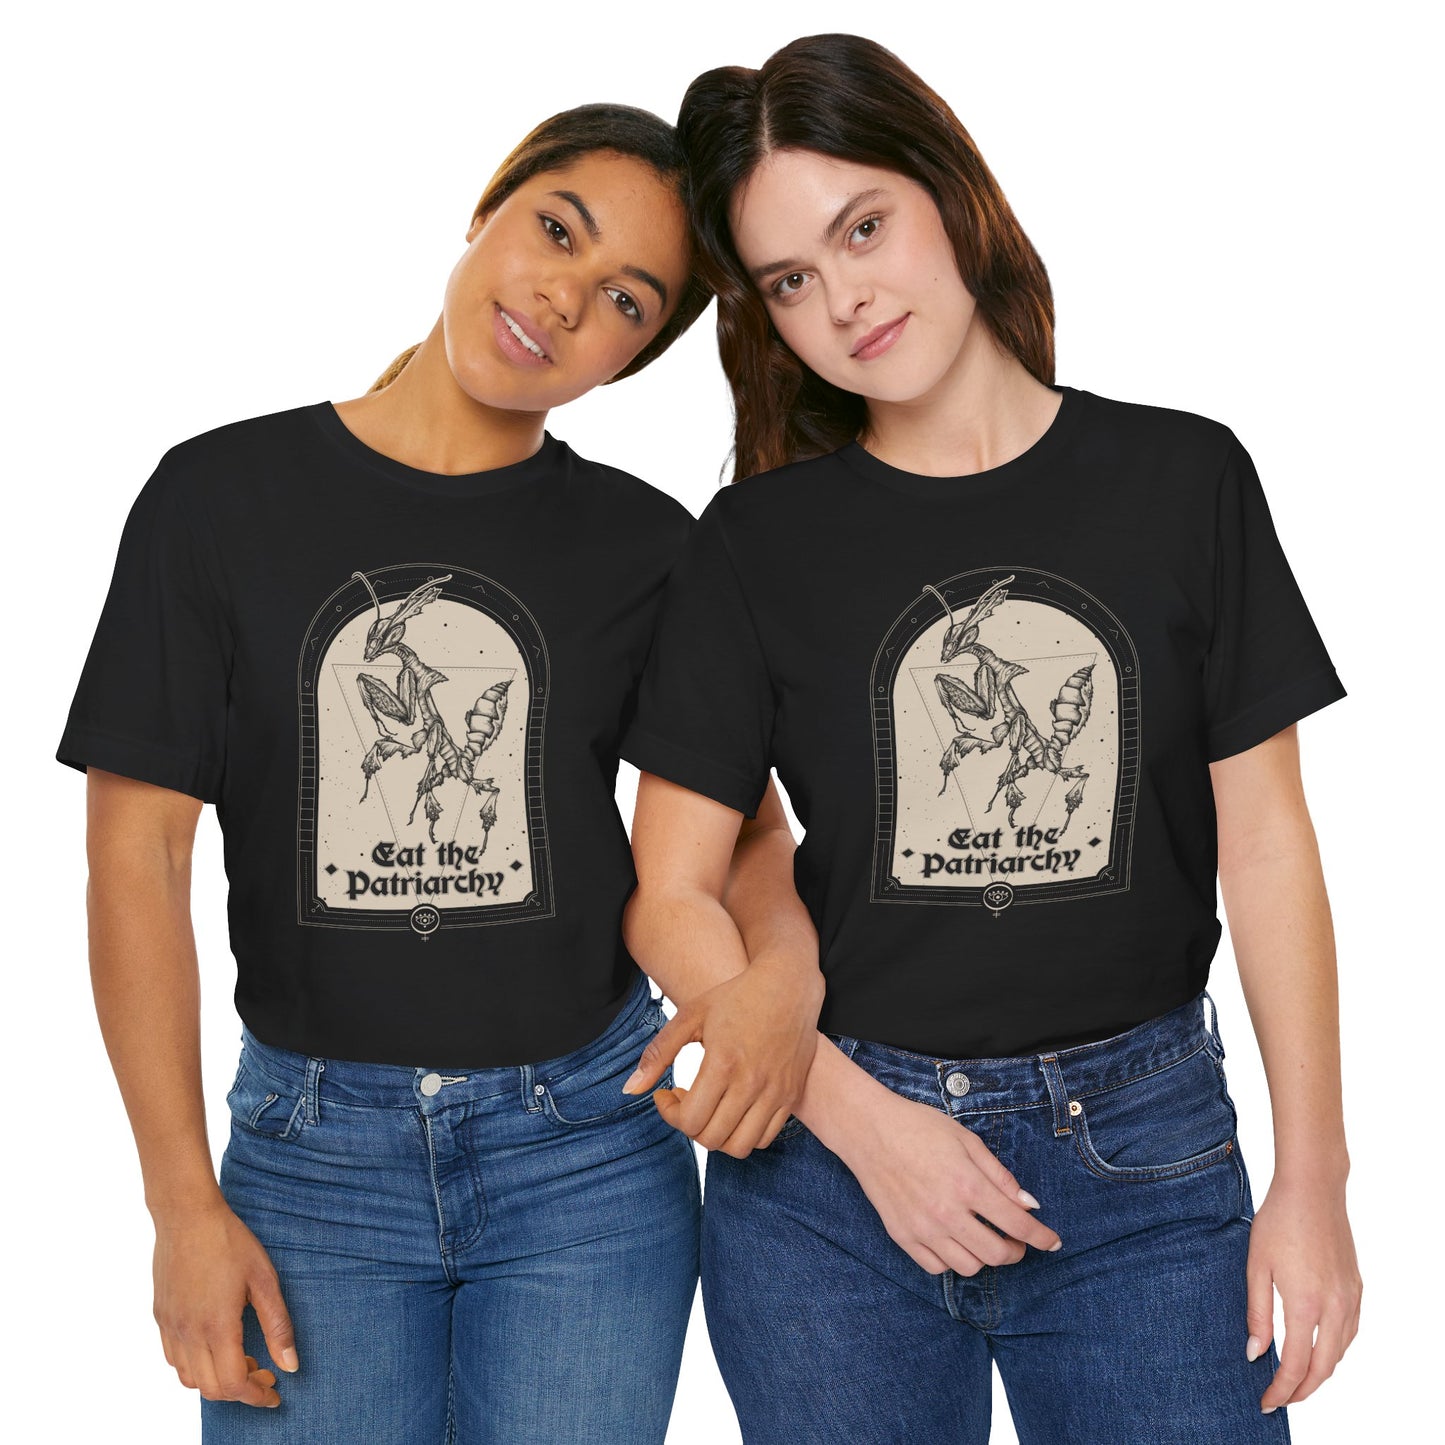 a young lesbian couple wearing matching blue jeans and goth black tees with a witchy feminist praying mantis illustration that says "eat the patriarchy"